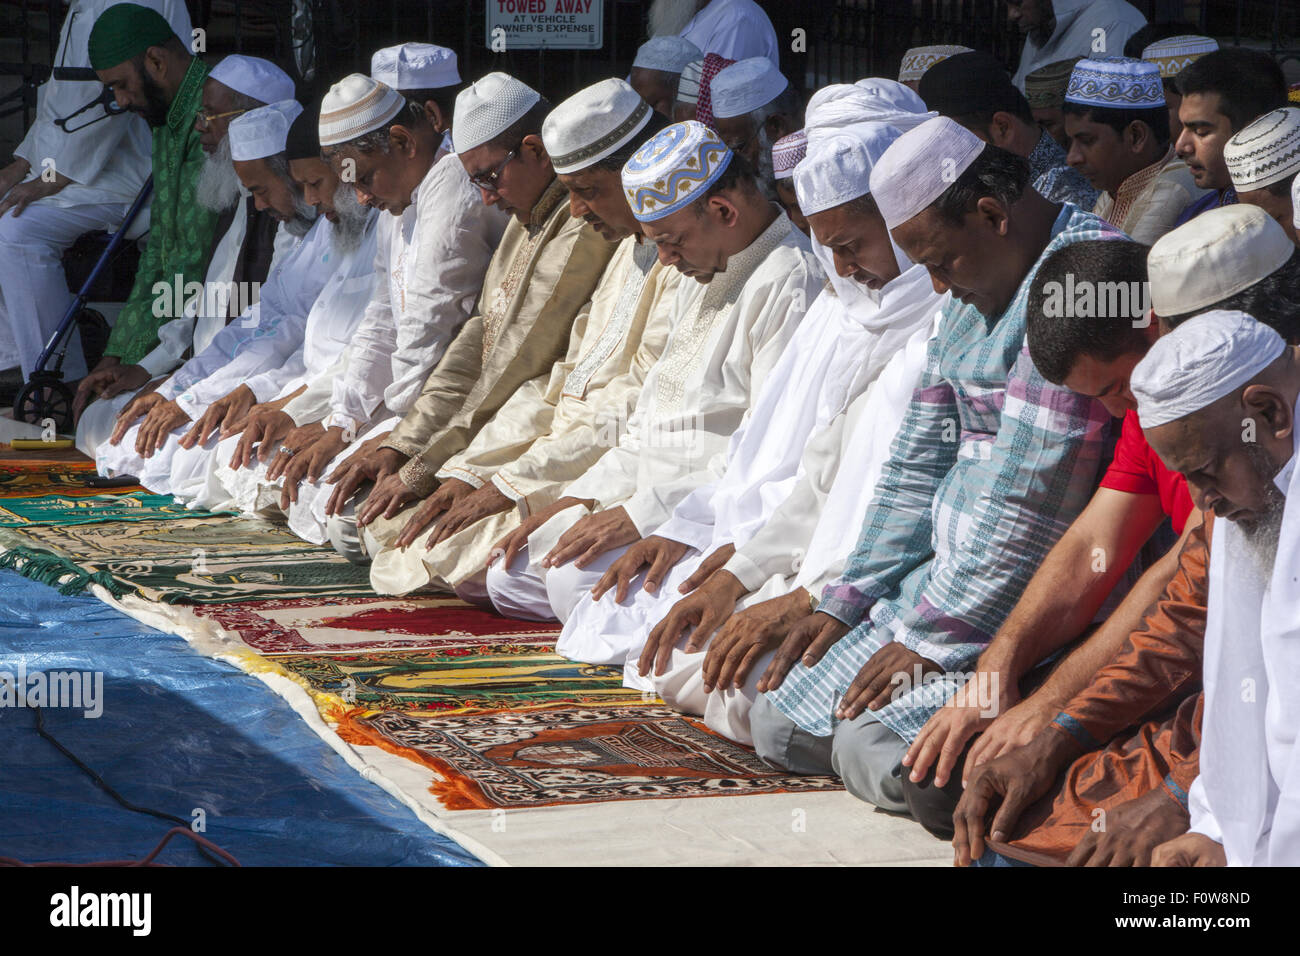 Muslims pray outside a mosque in Kensington, Brooklyn, NY for 'Eid al-Fitr.' The holiday is celebrated around the world, marking  the end of Ramadan. Stock Photo